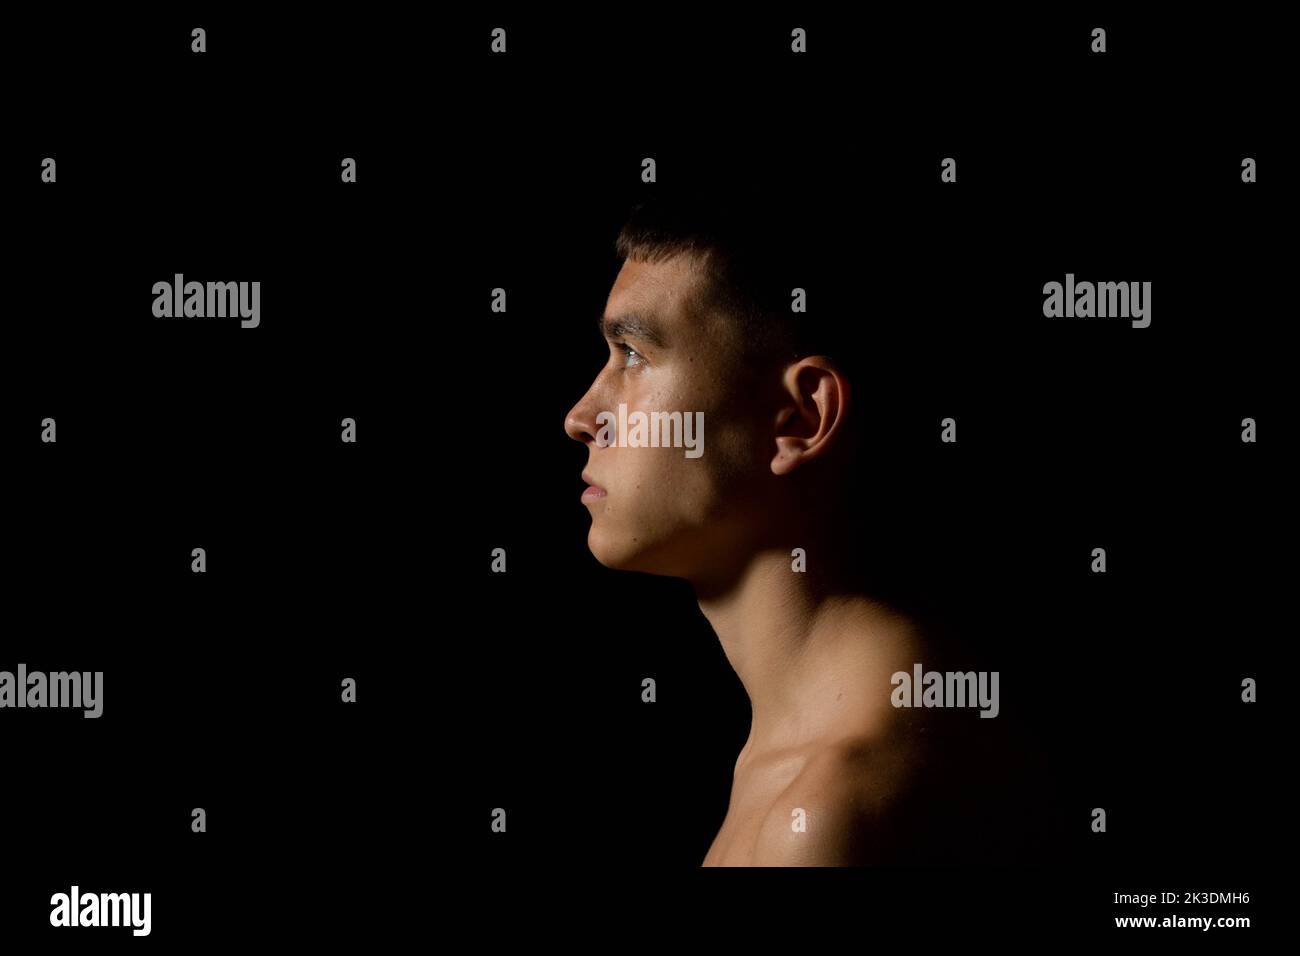 Side view of the head of a 19 year old teenage boy on black background Stock Photo